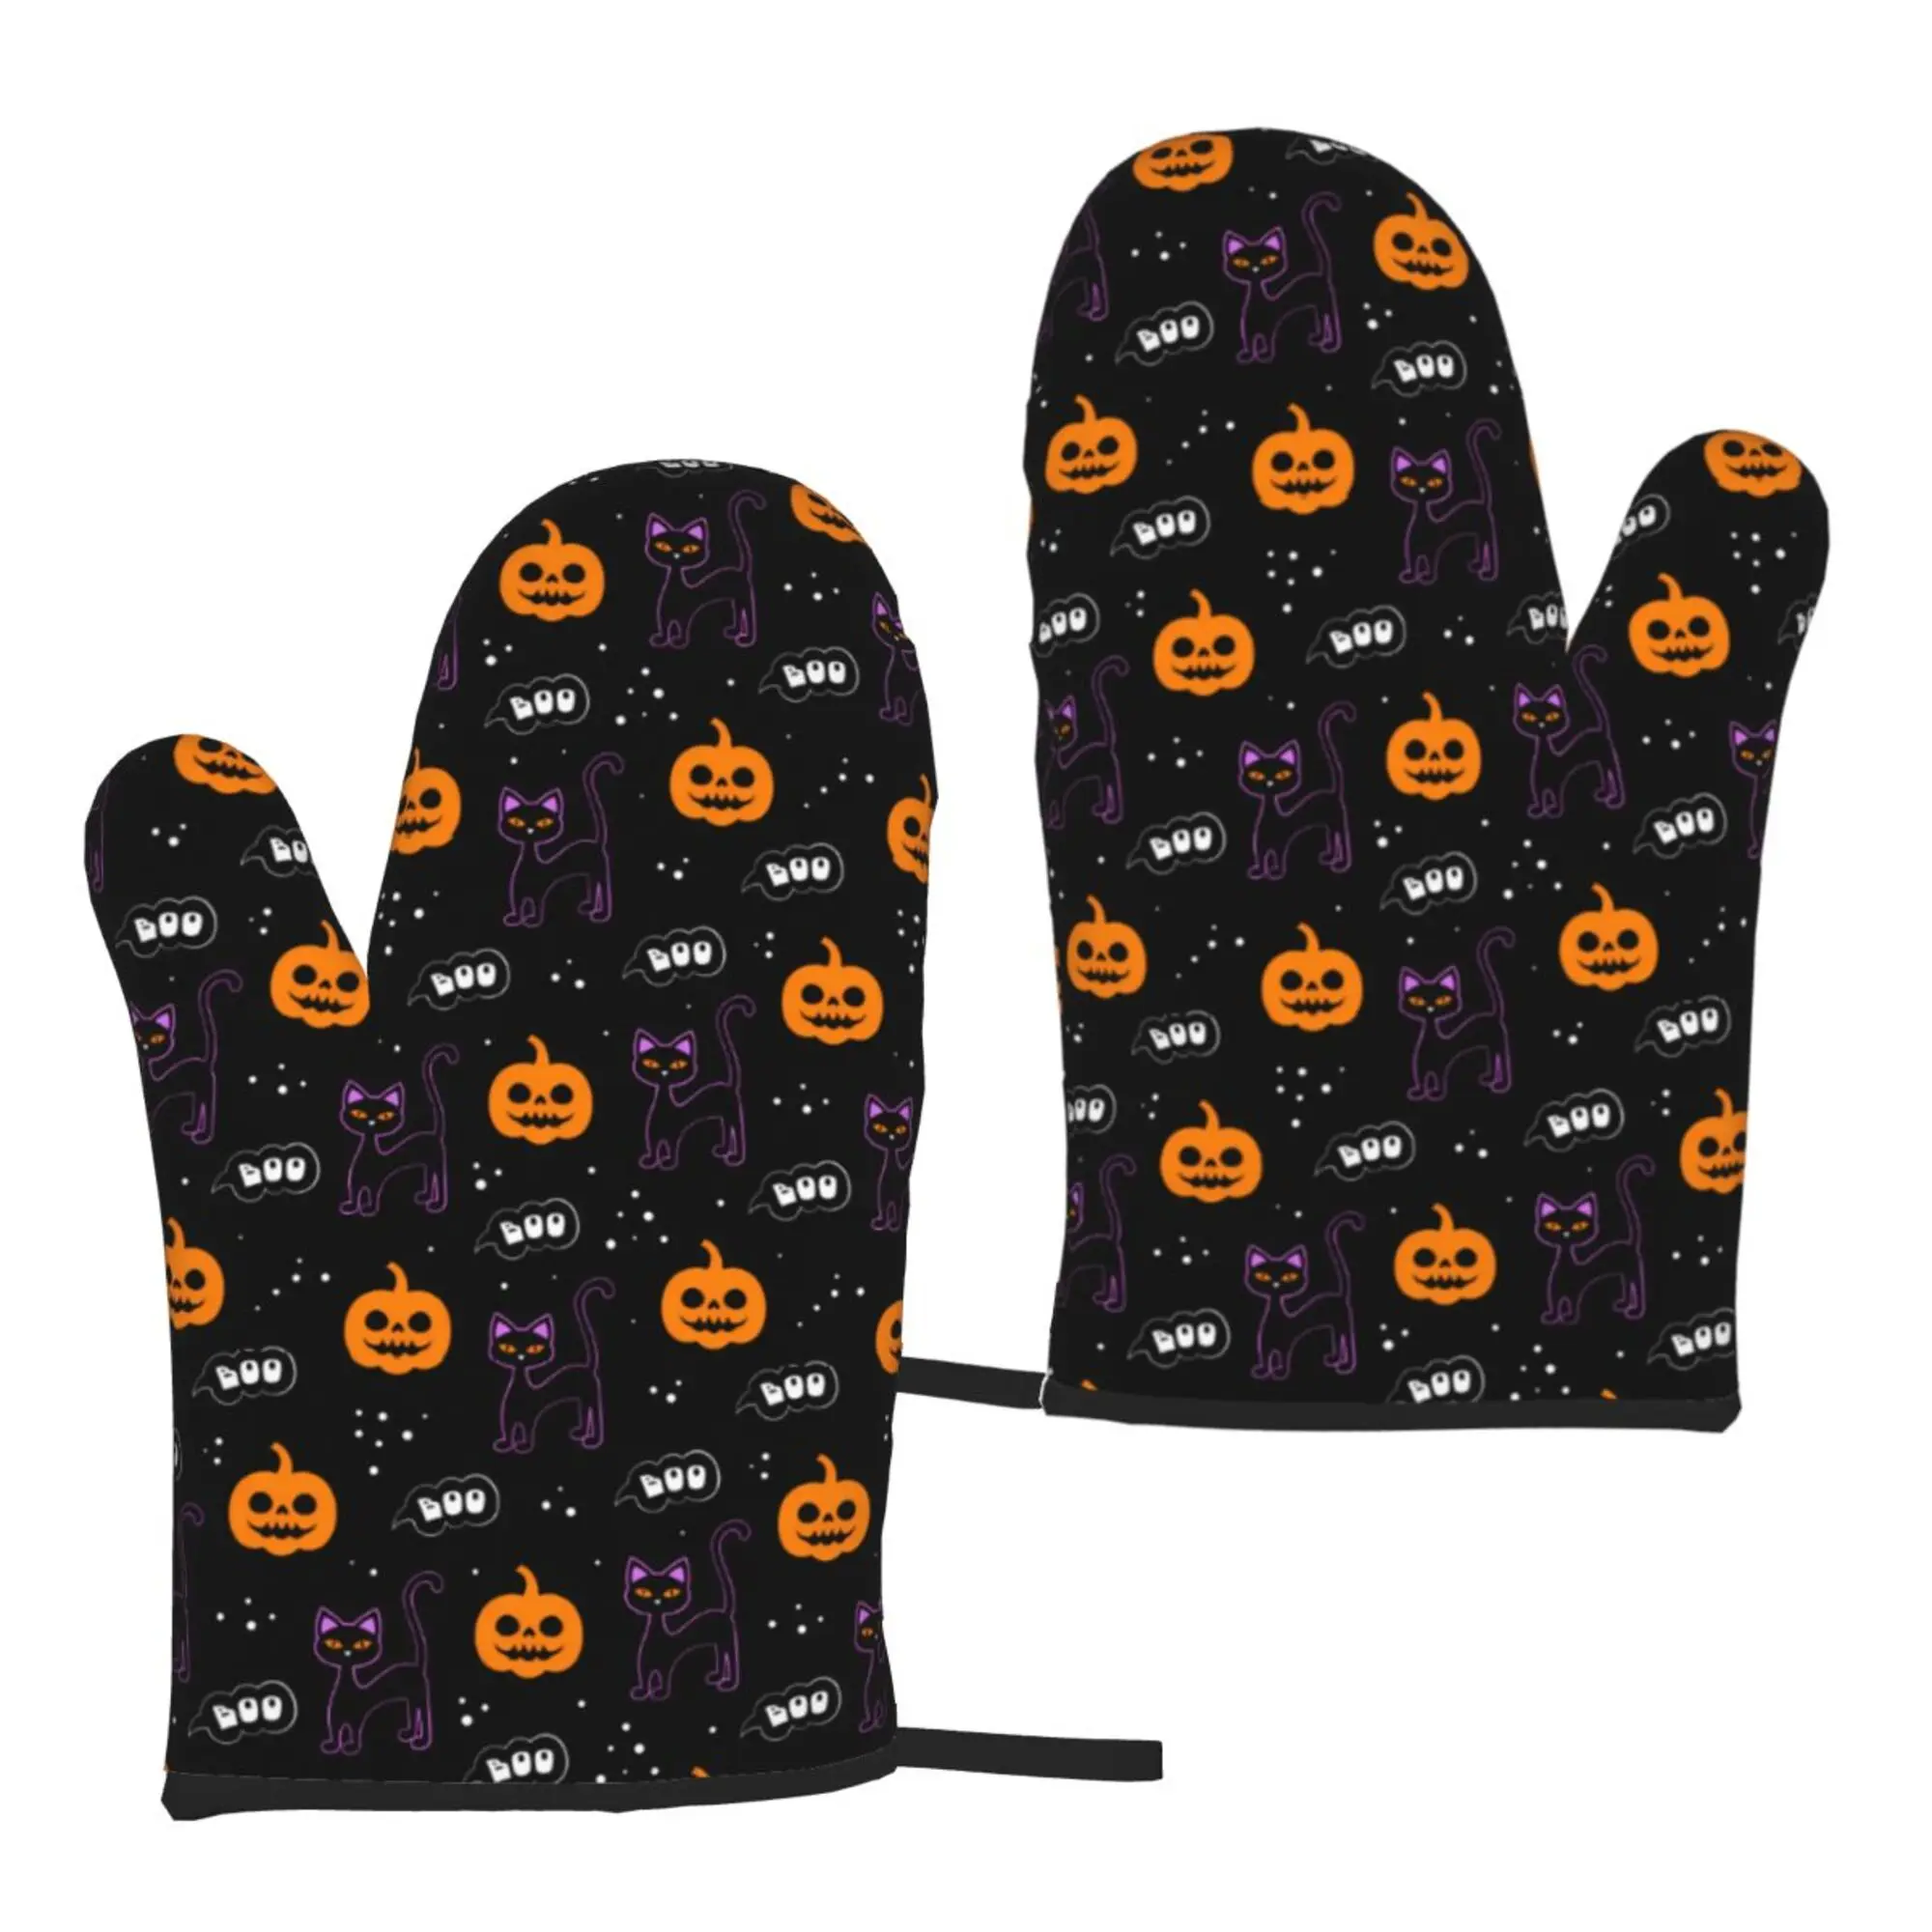 Black Cat Boo Pumpkin Halloween Oven Mitts 2pc Microwave Gloves Bbq Cooking Gloves Heat Resistant Kitchen Gloves One Size 1pair aramid high temperature resistant gloves oven mitts knitting heat insulation workshop mould gloves bbq kitchen oven gloves